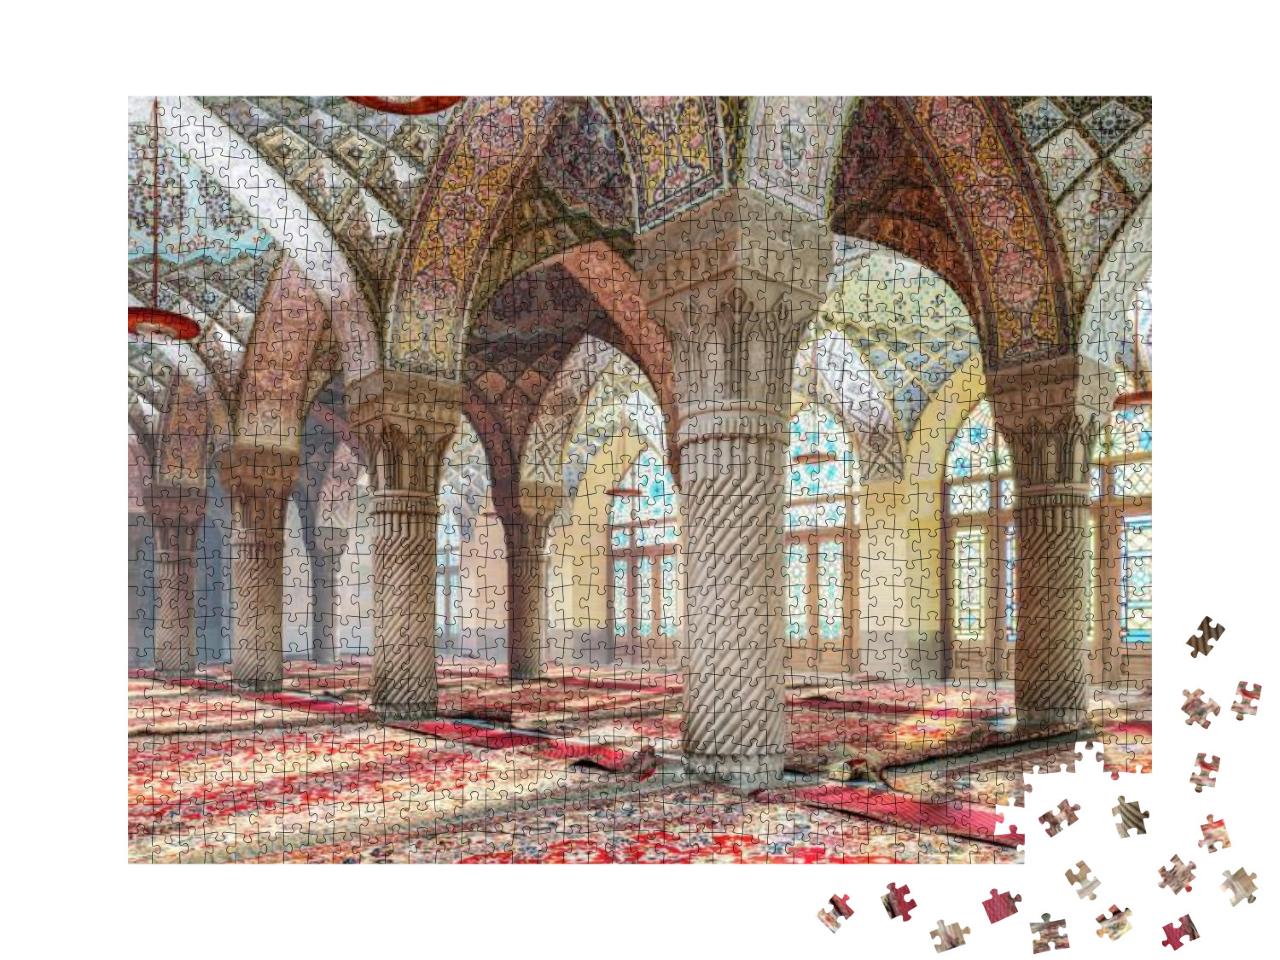 Moroccan Columns with Arches. Moroccan Patterns on Arches... Jigsaw Puzzle with 1000 pieces